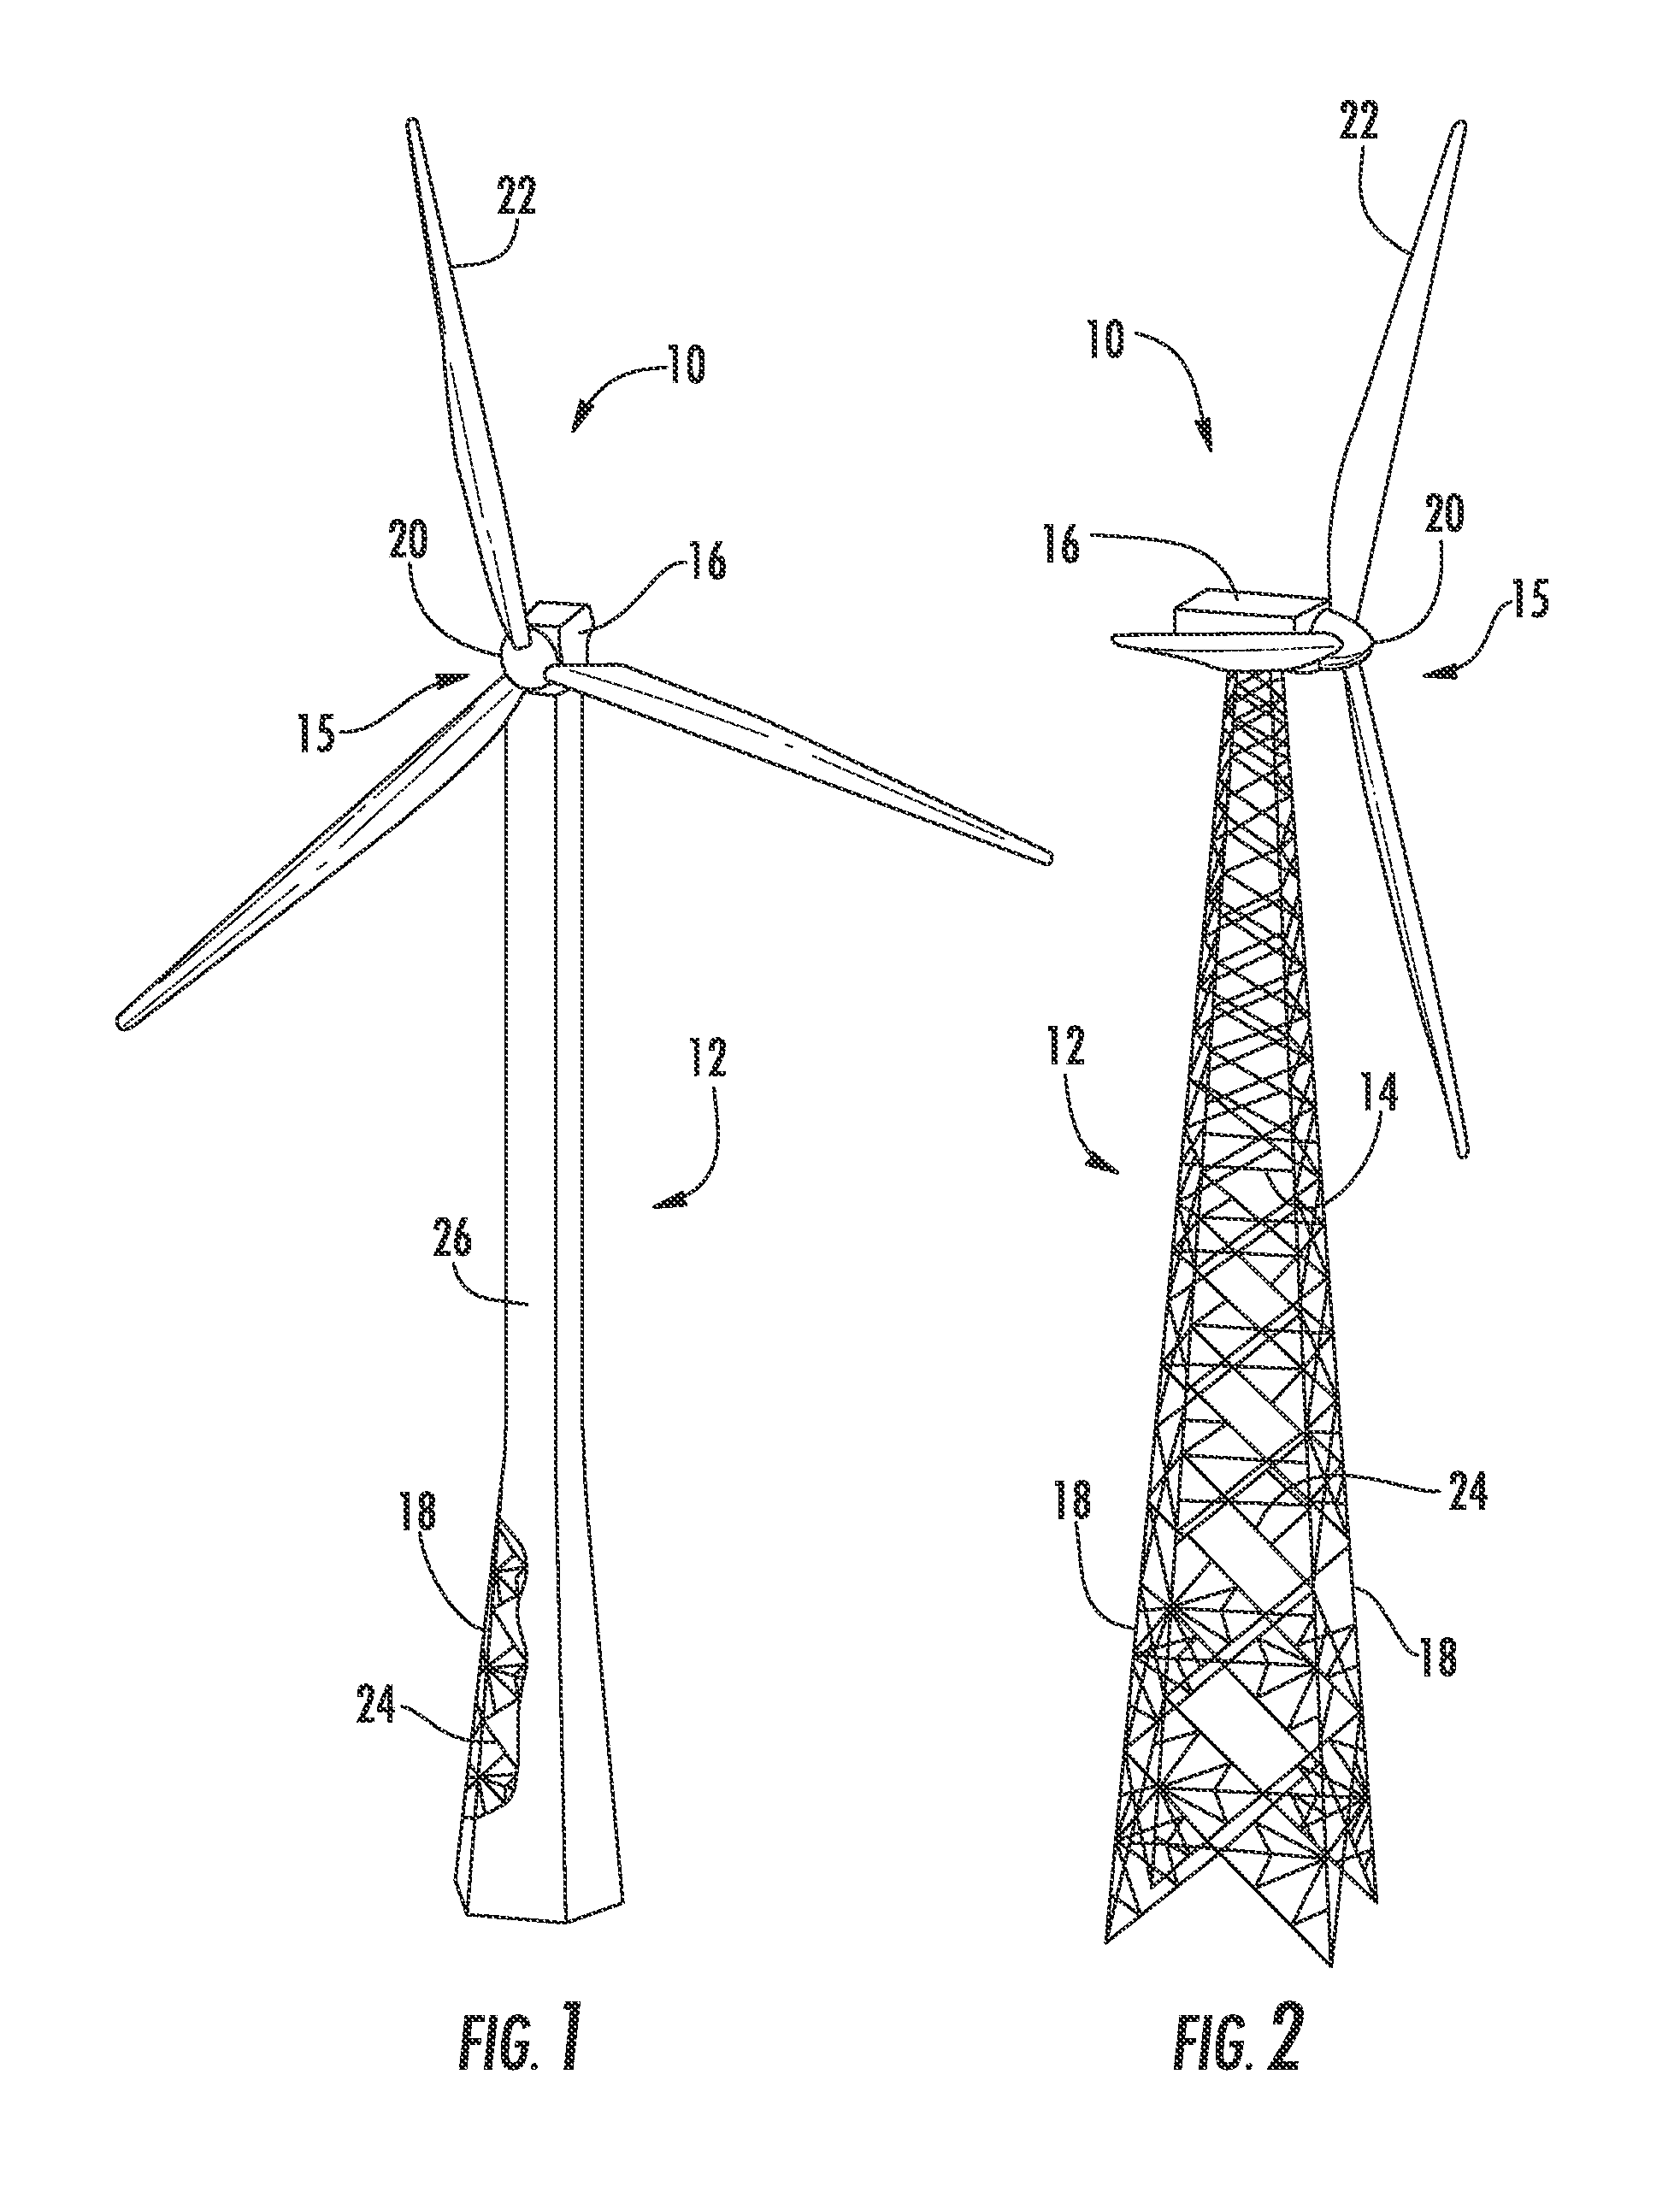 System and Method for Reducing Torsional Movement in a Wind Turbine Tower